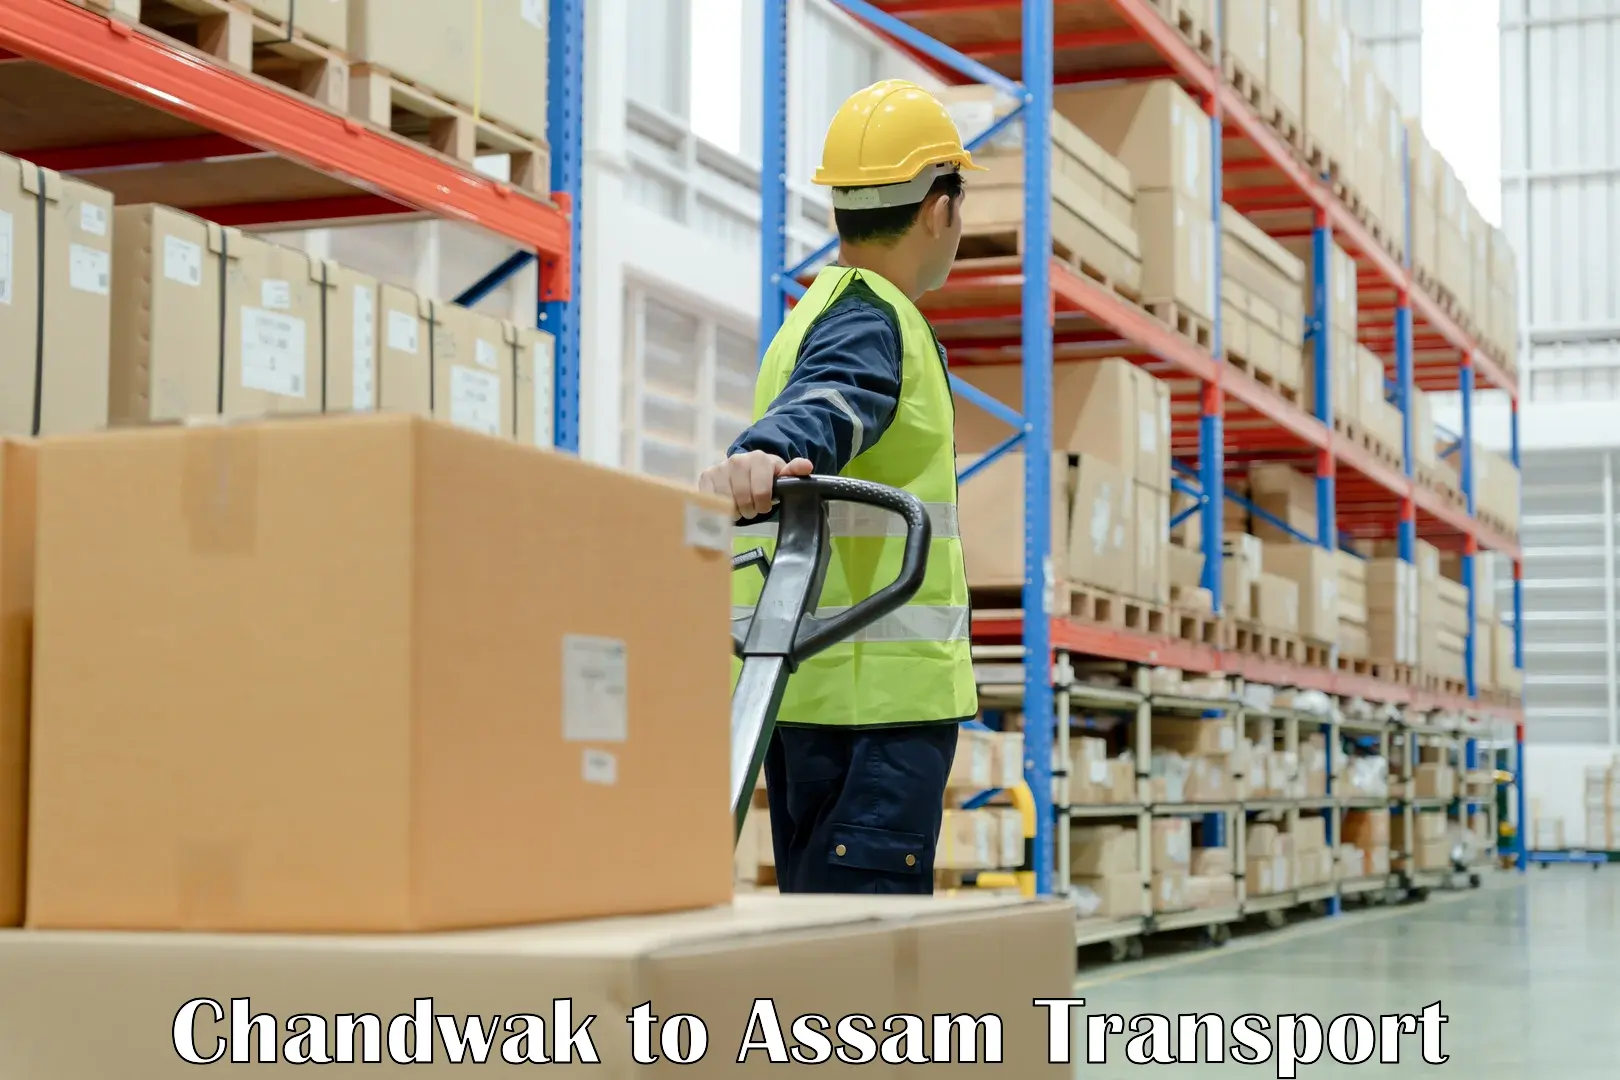 Part load transport service in India Chandwak to Assam